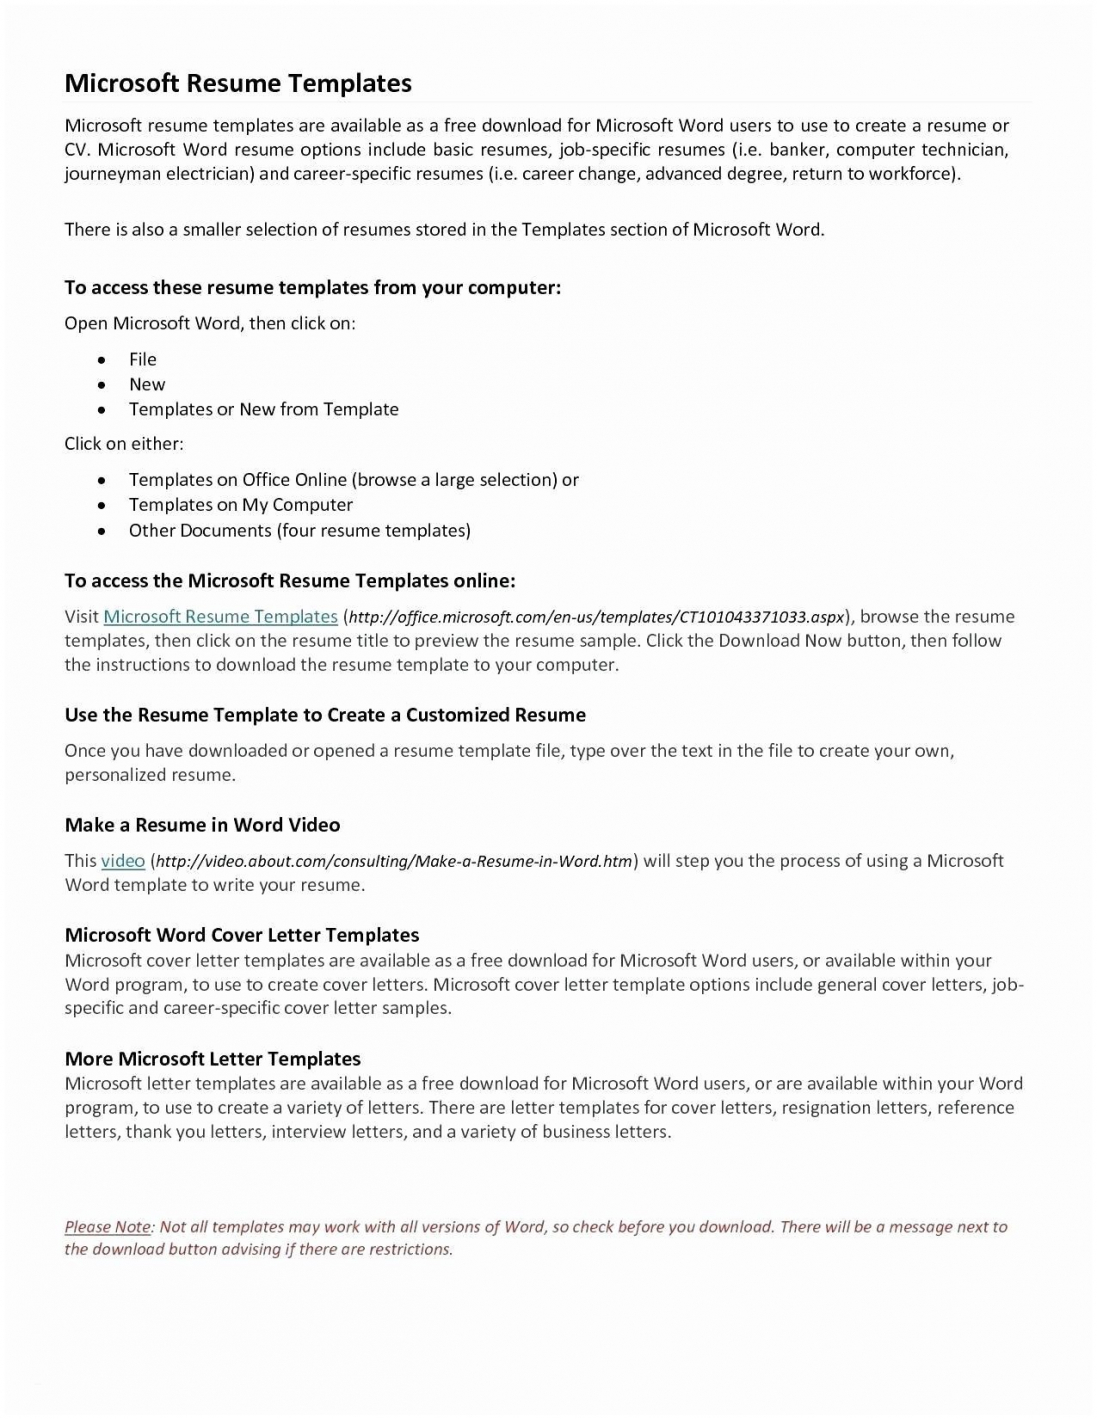 030 Formal Letter Microsoft Word Valid Resume Template Ideas With Regard To How To Make A Cv Template On Microsoft Word